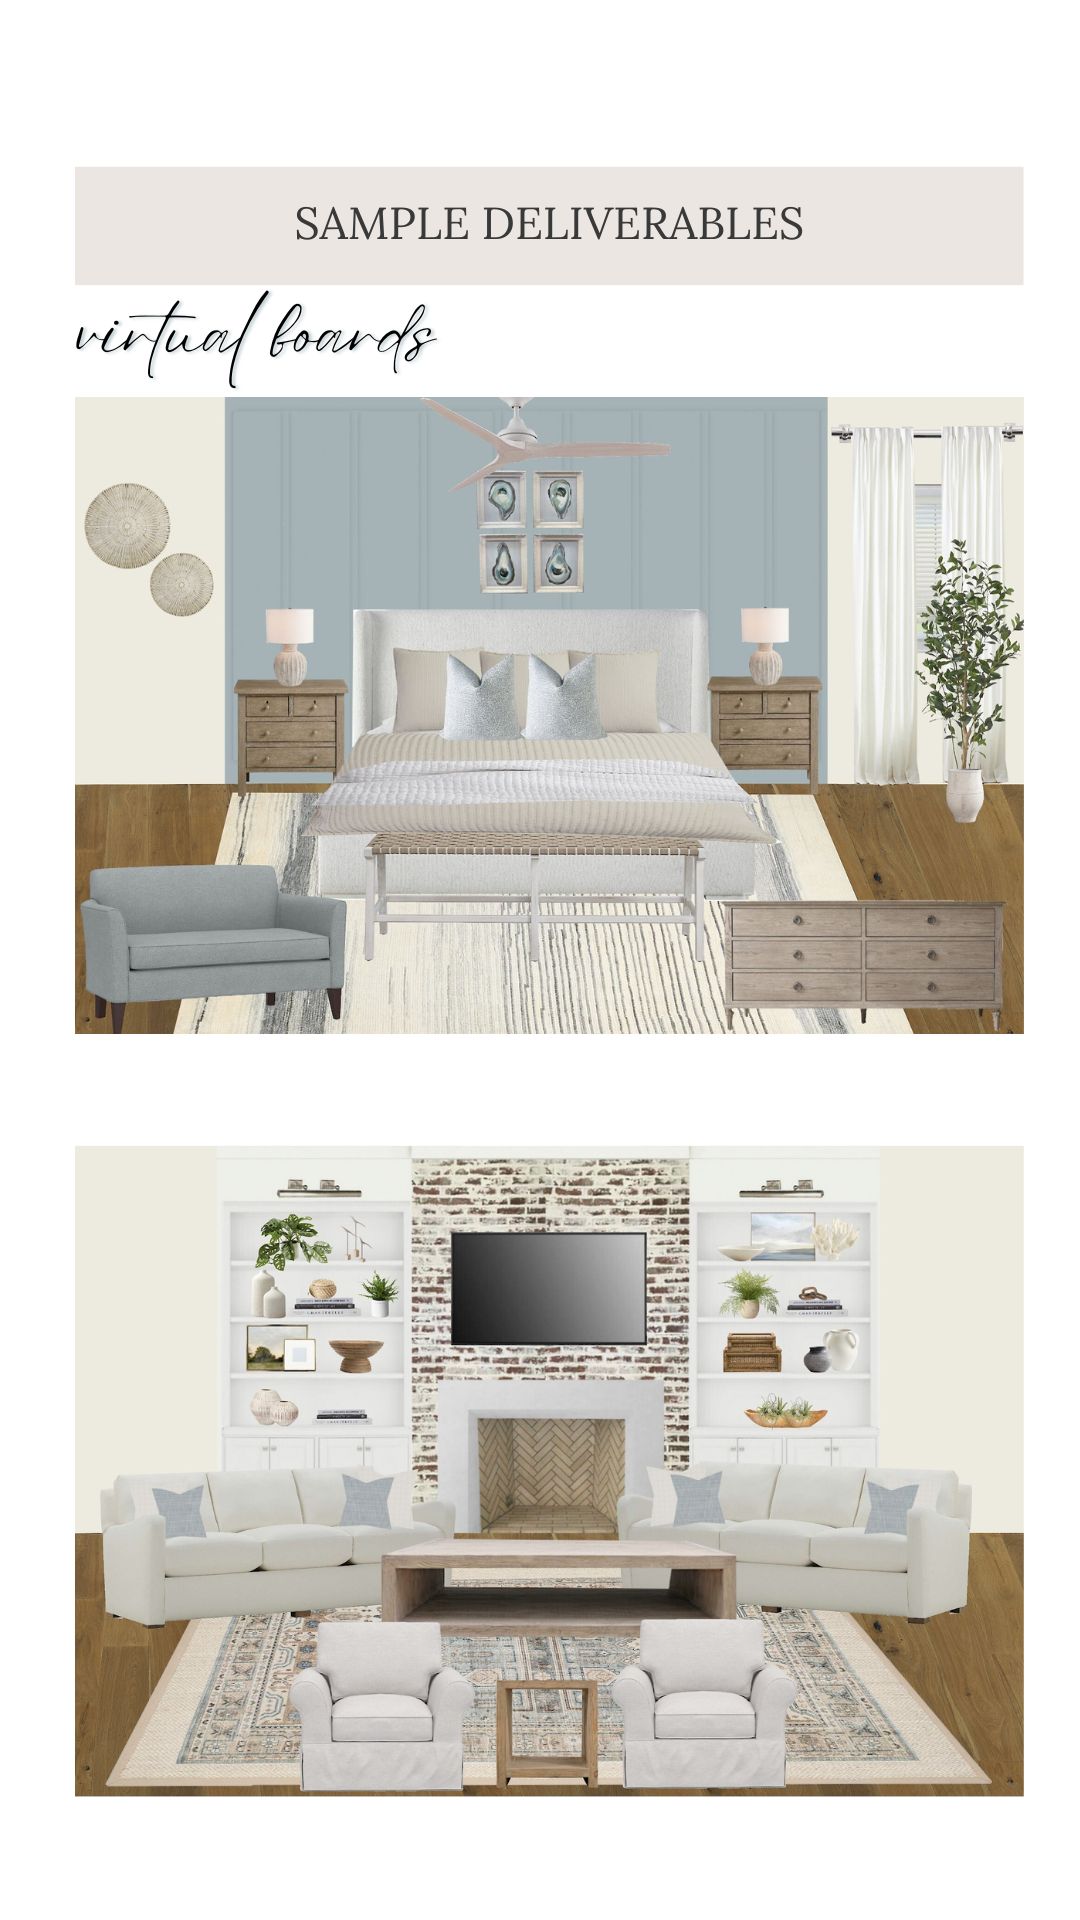 Another example of the beautiful digital design board provided to a client by Welcome Home Styling.